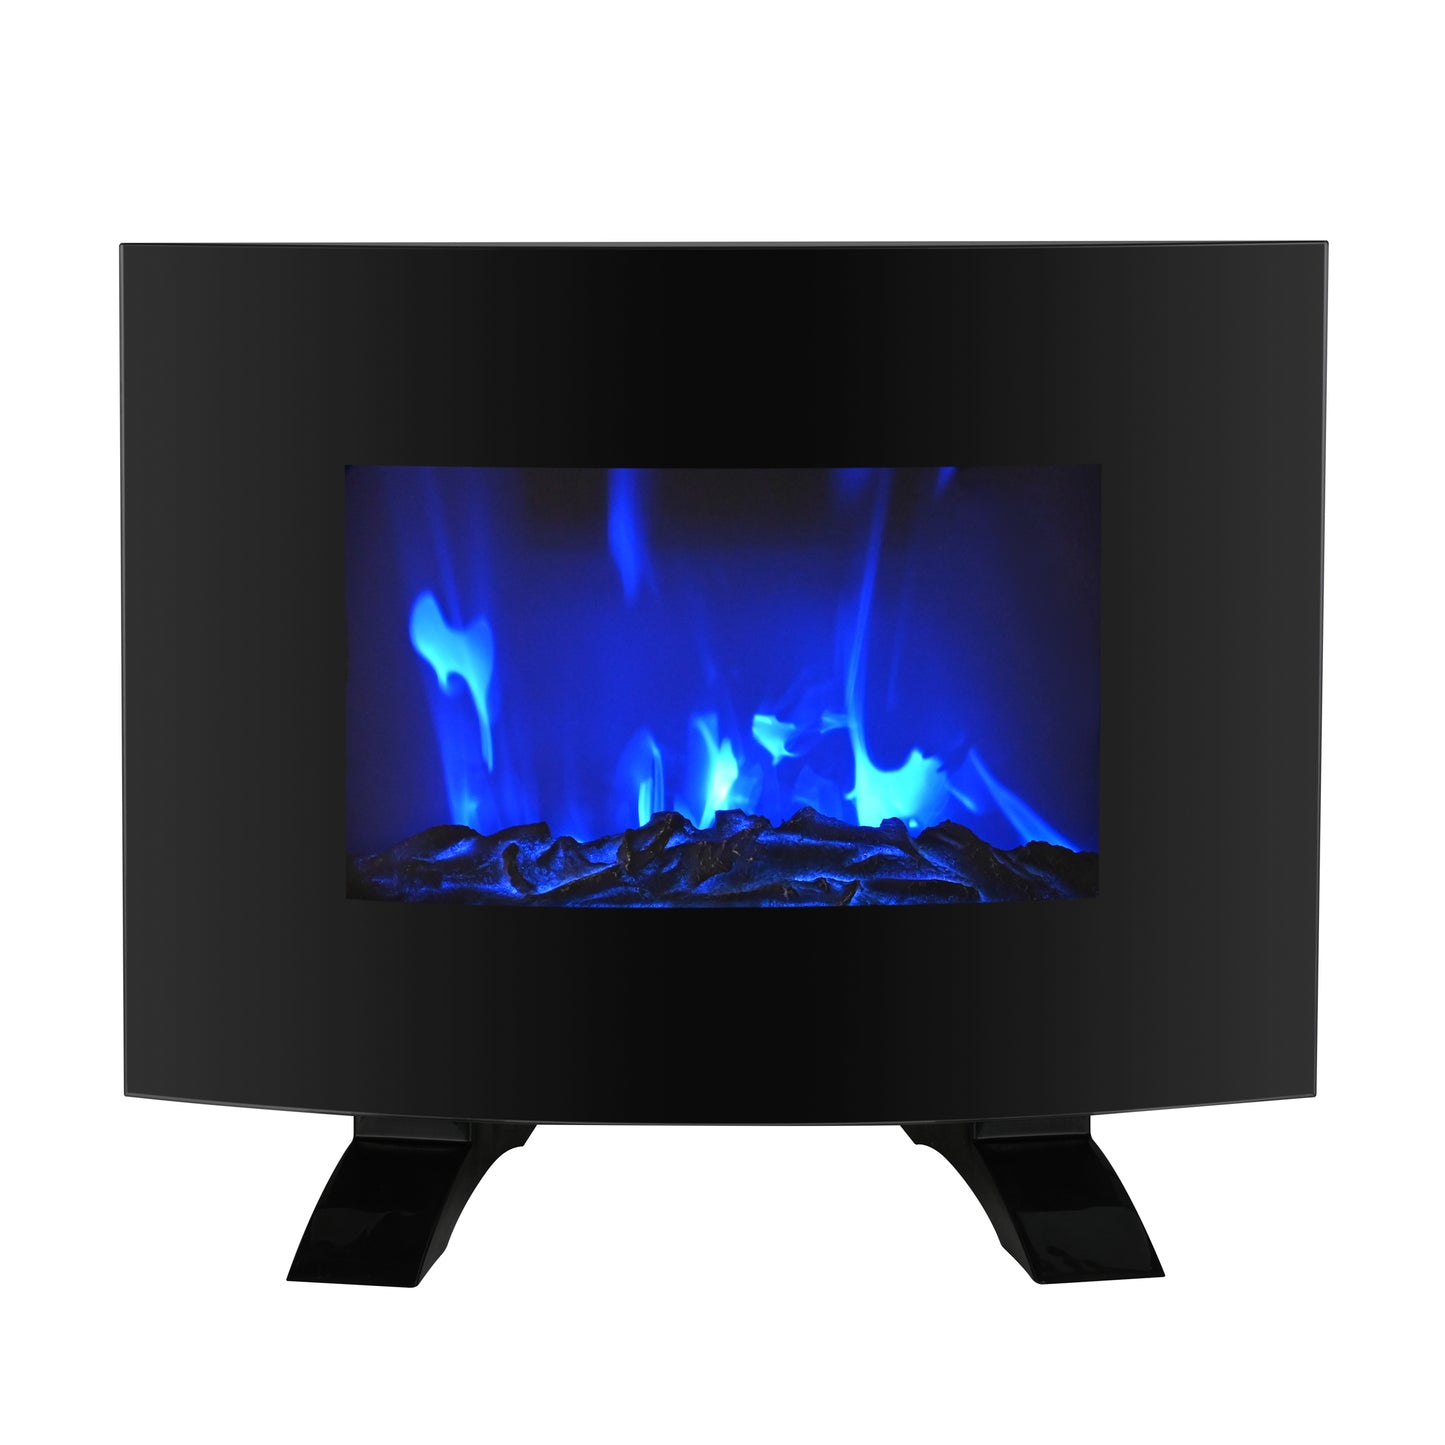 Danby 22" Wall Mount Electric Fireplace in Black